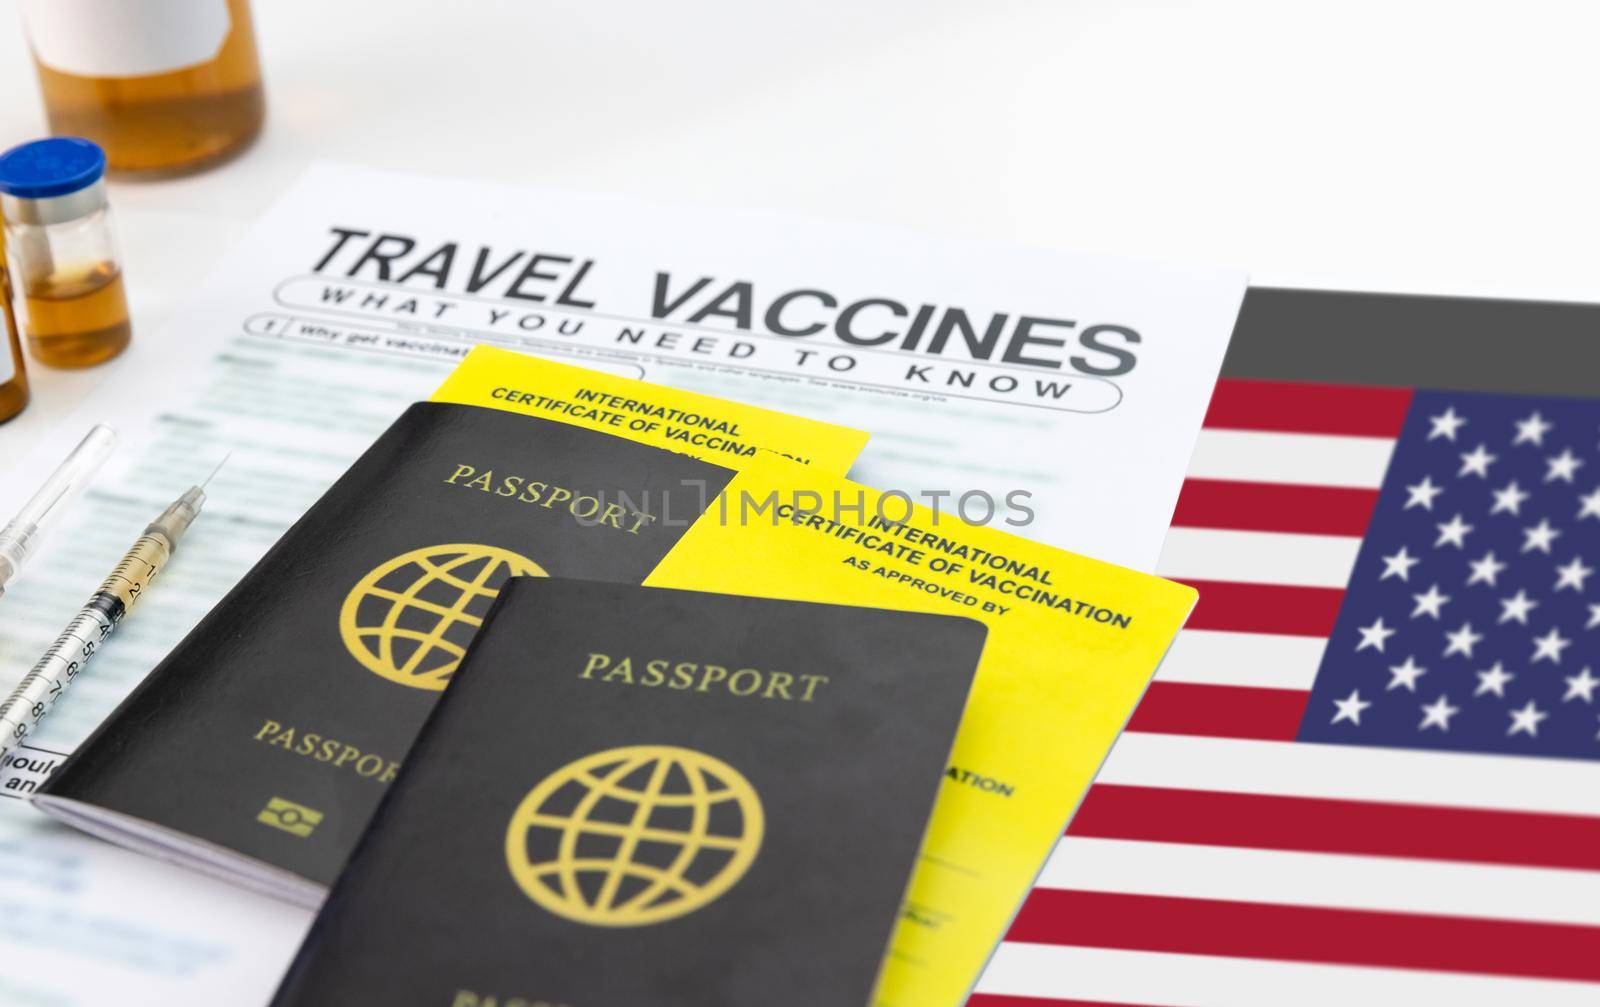 Get international certificate of the vaccination before travel